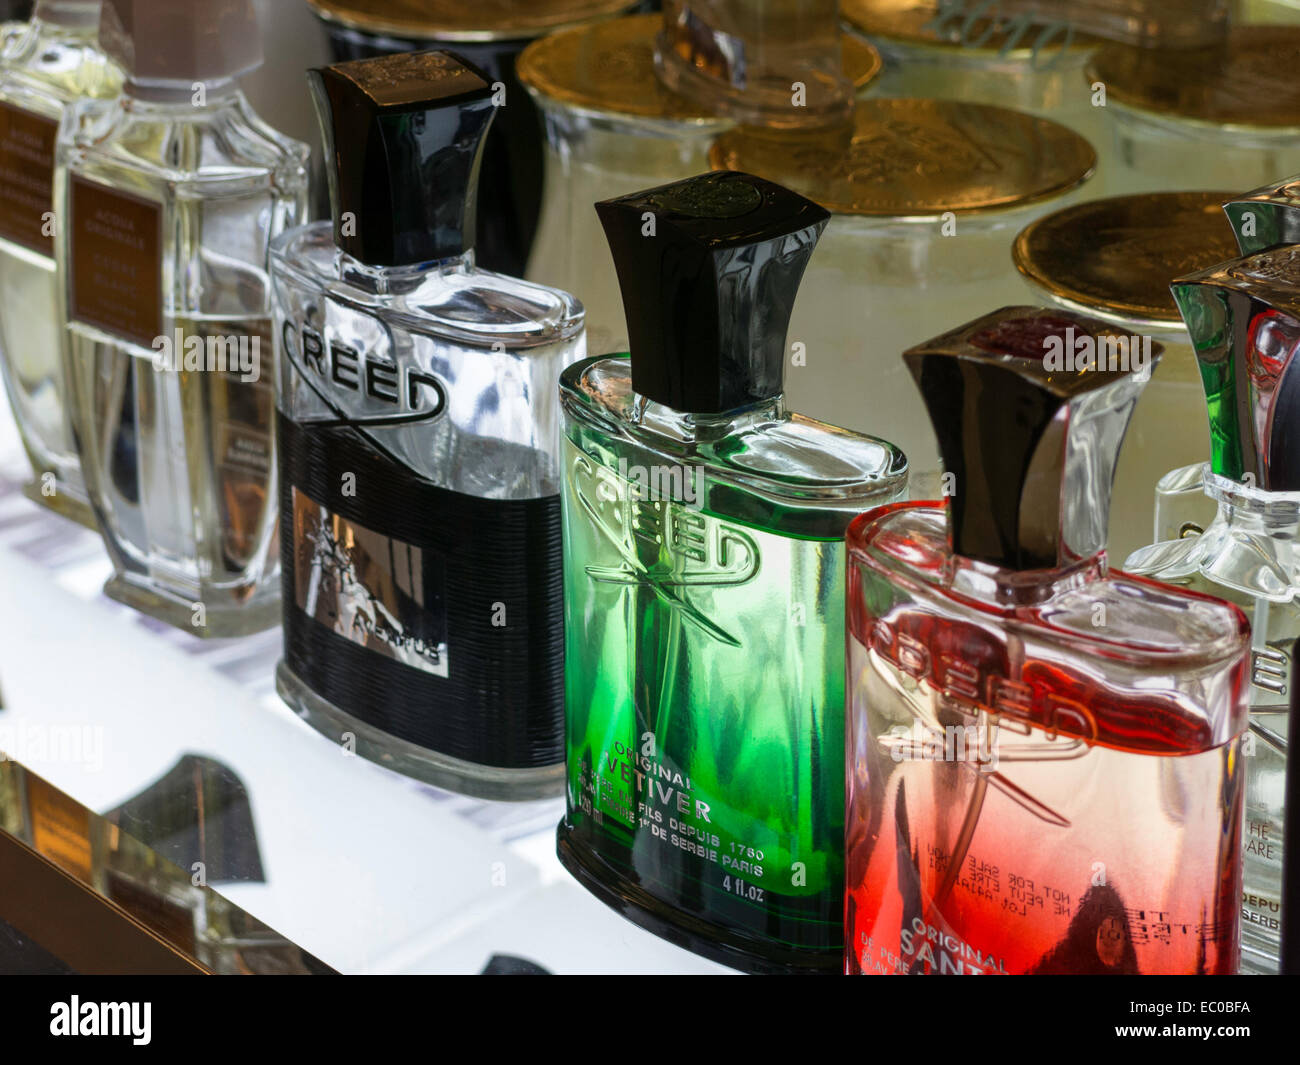 Creed Cologne in Saks Fifth Avenue, NYC, USA Stock Photo